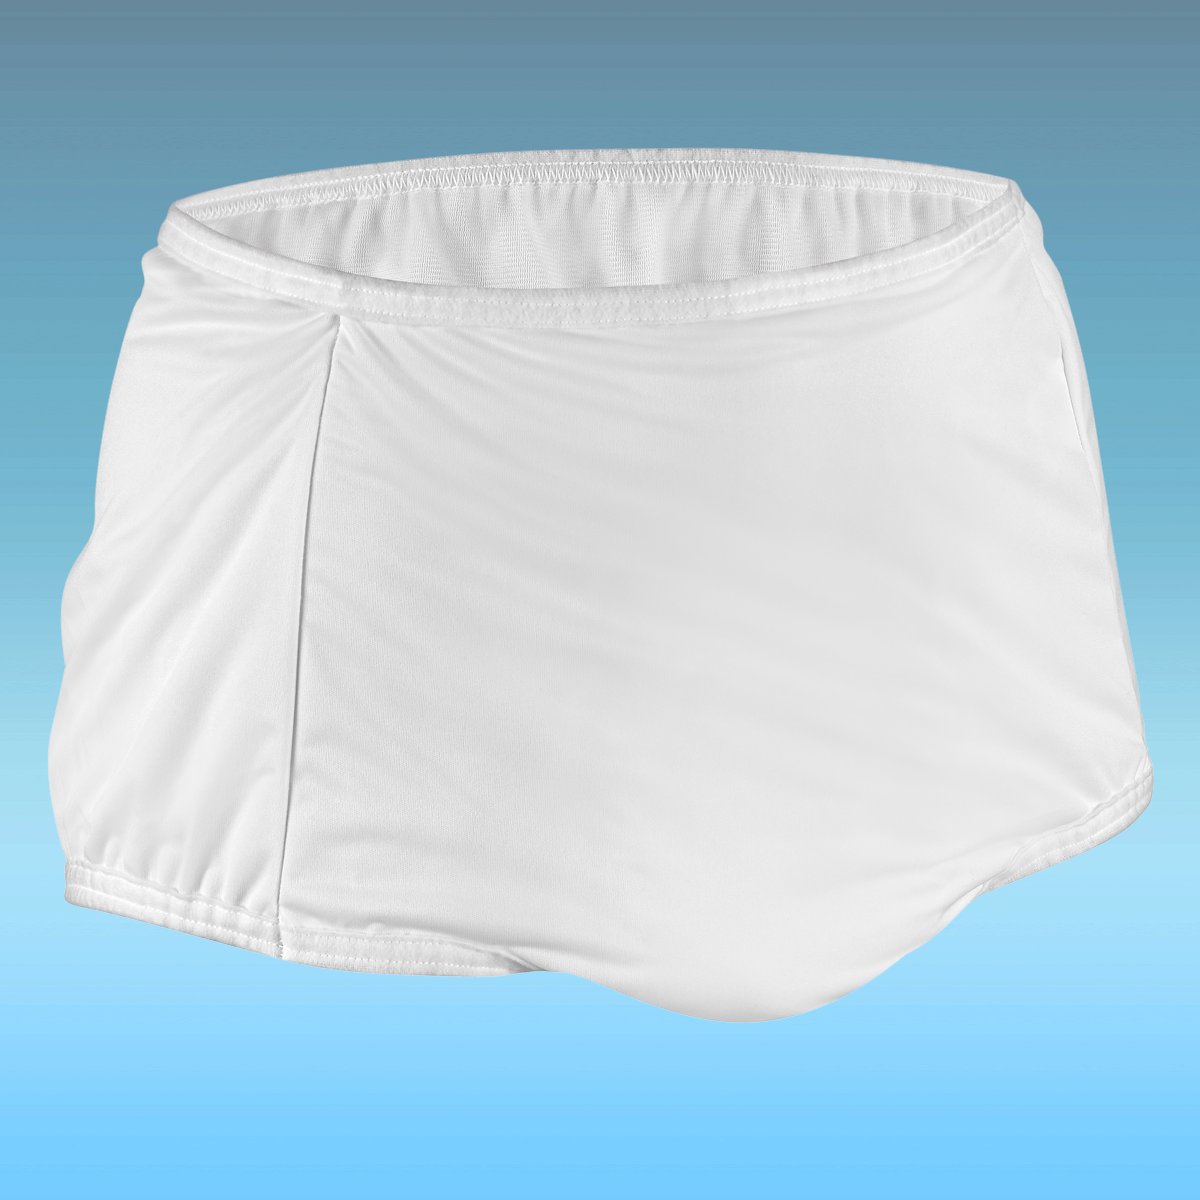 Kleinert's Women's Safe and Dry Waterproof Incontinence Panties with 6 Ply  Integrated Absorbent Core Style #WIP52